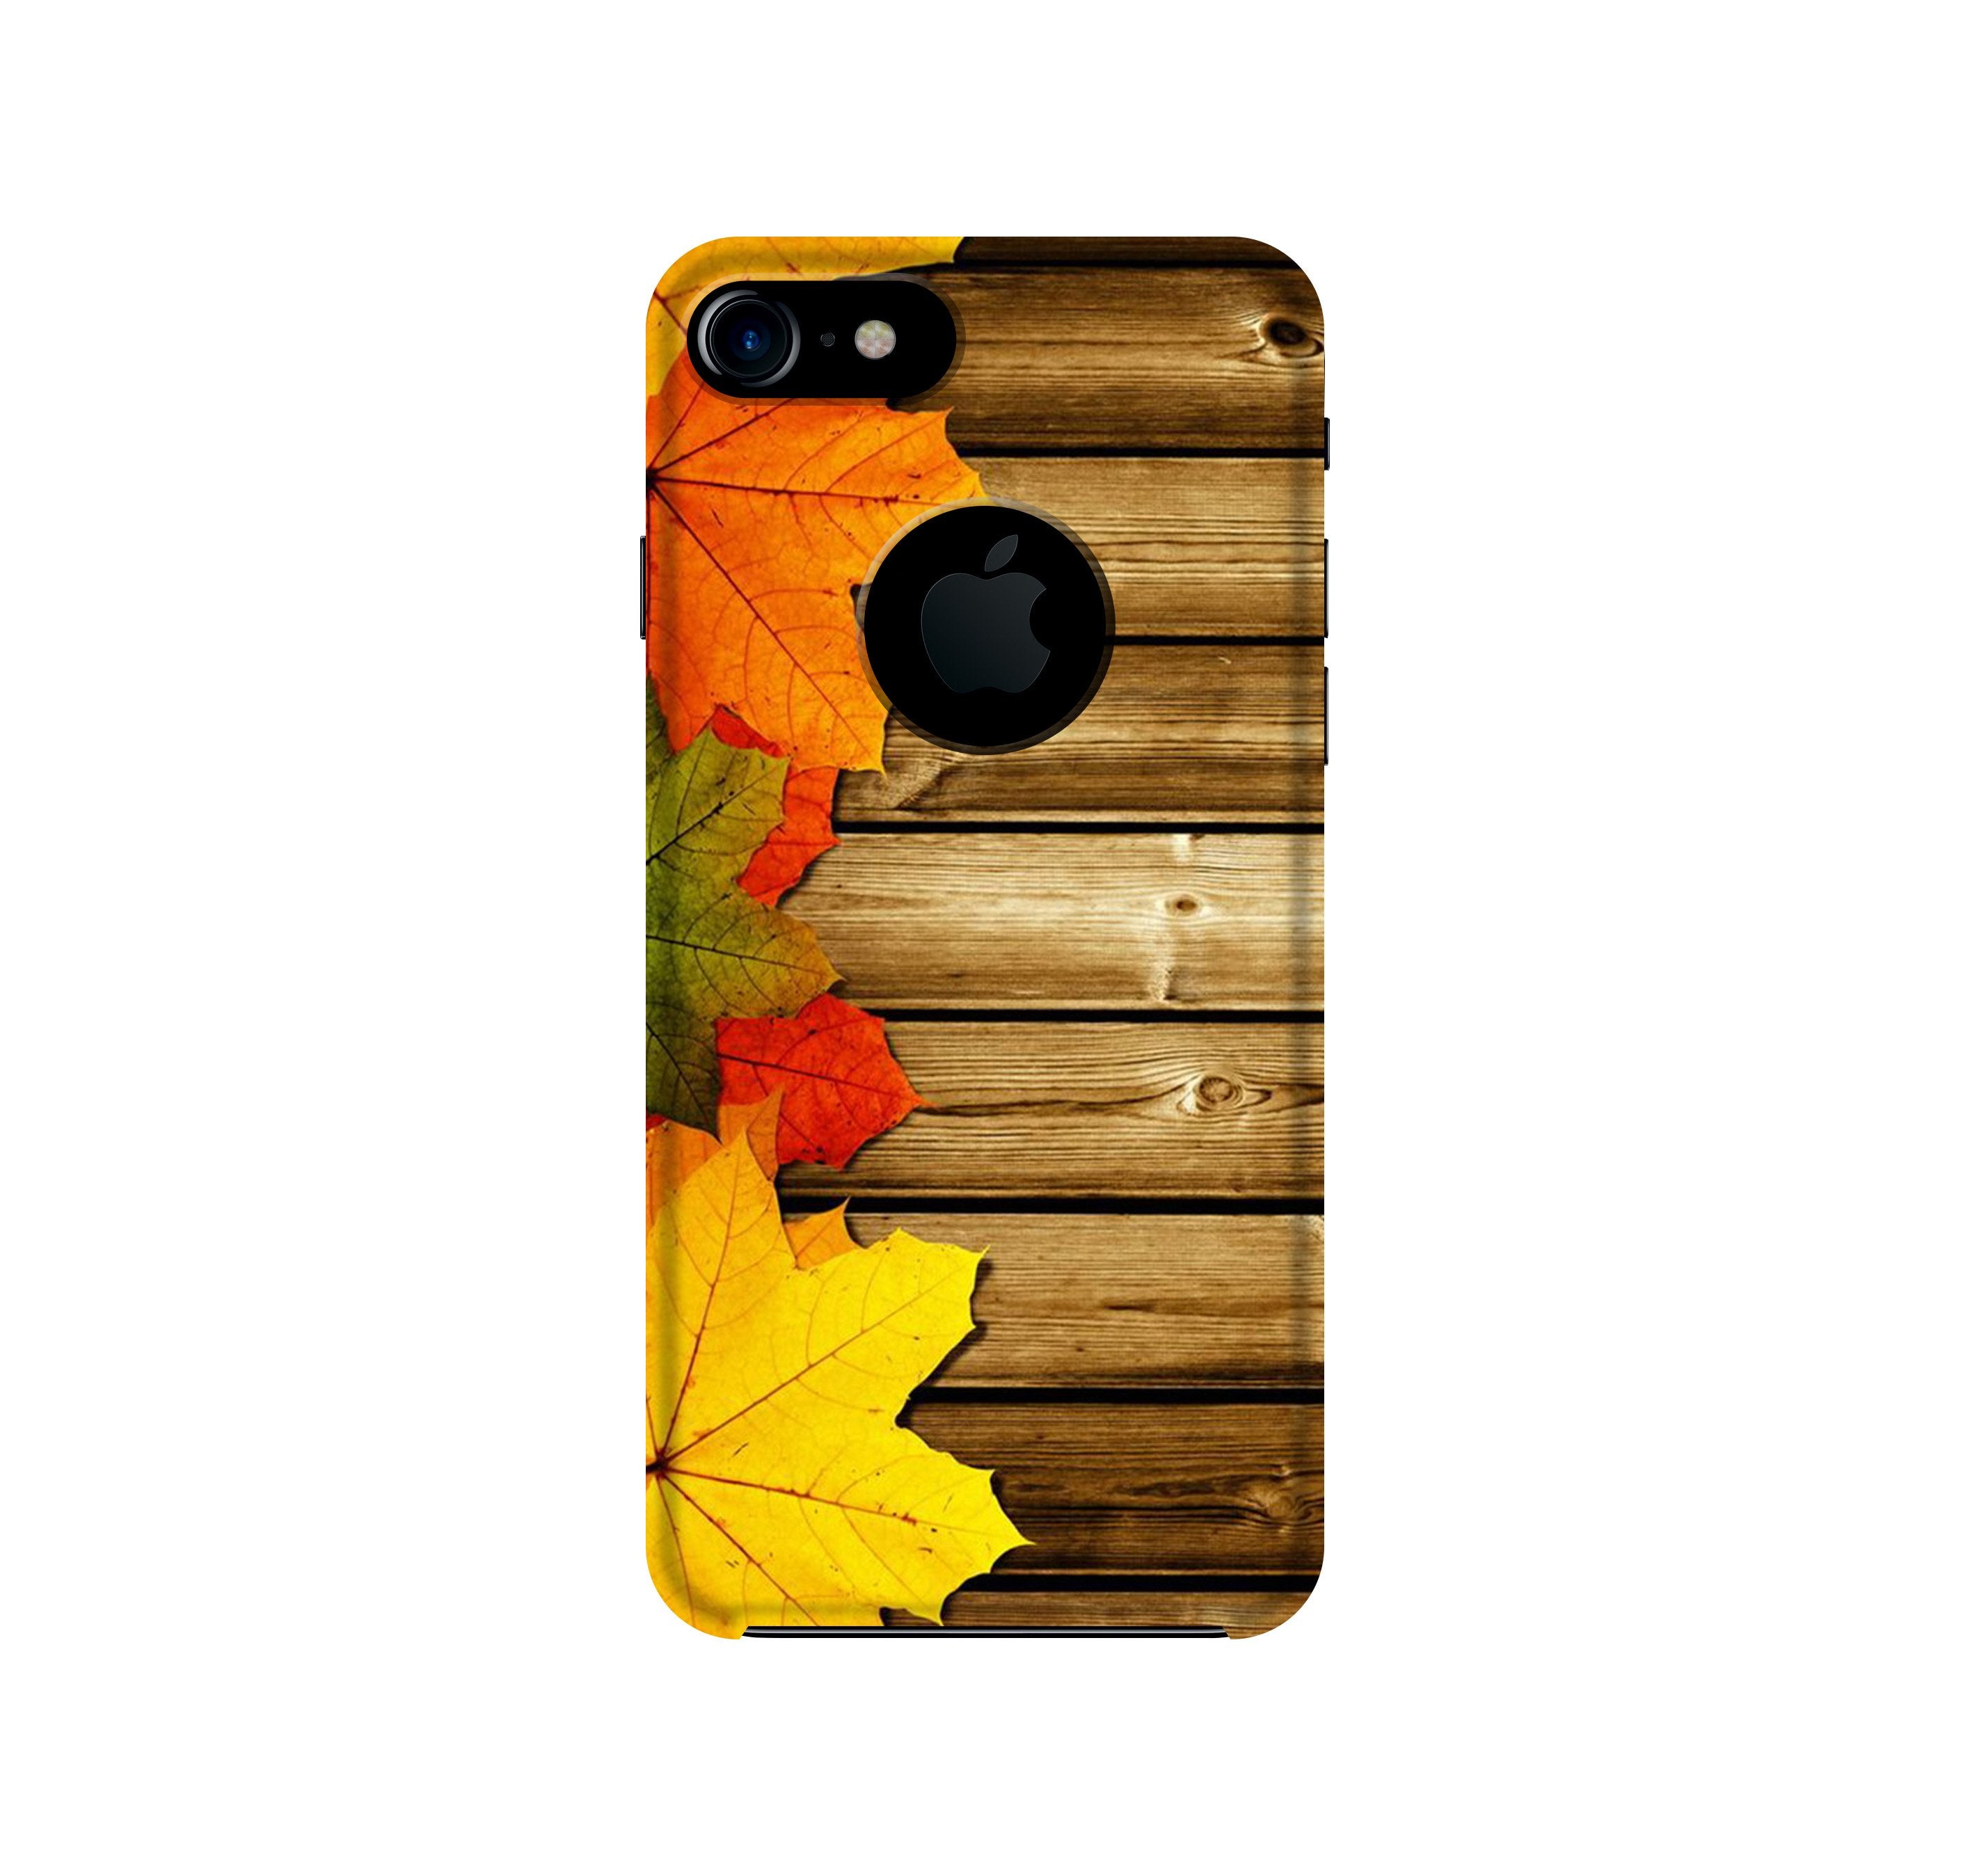 Wooden look3 Case for iPhone 7 logo cut